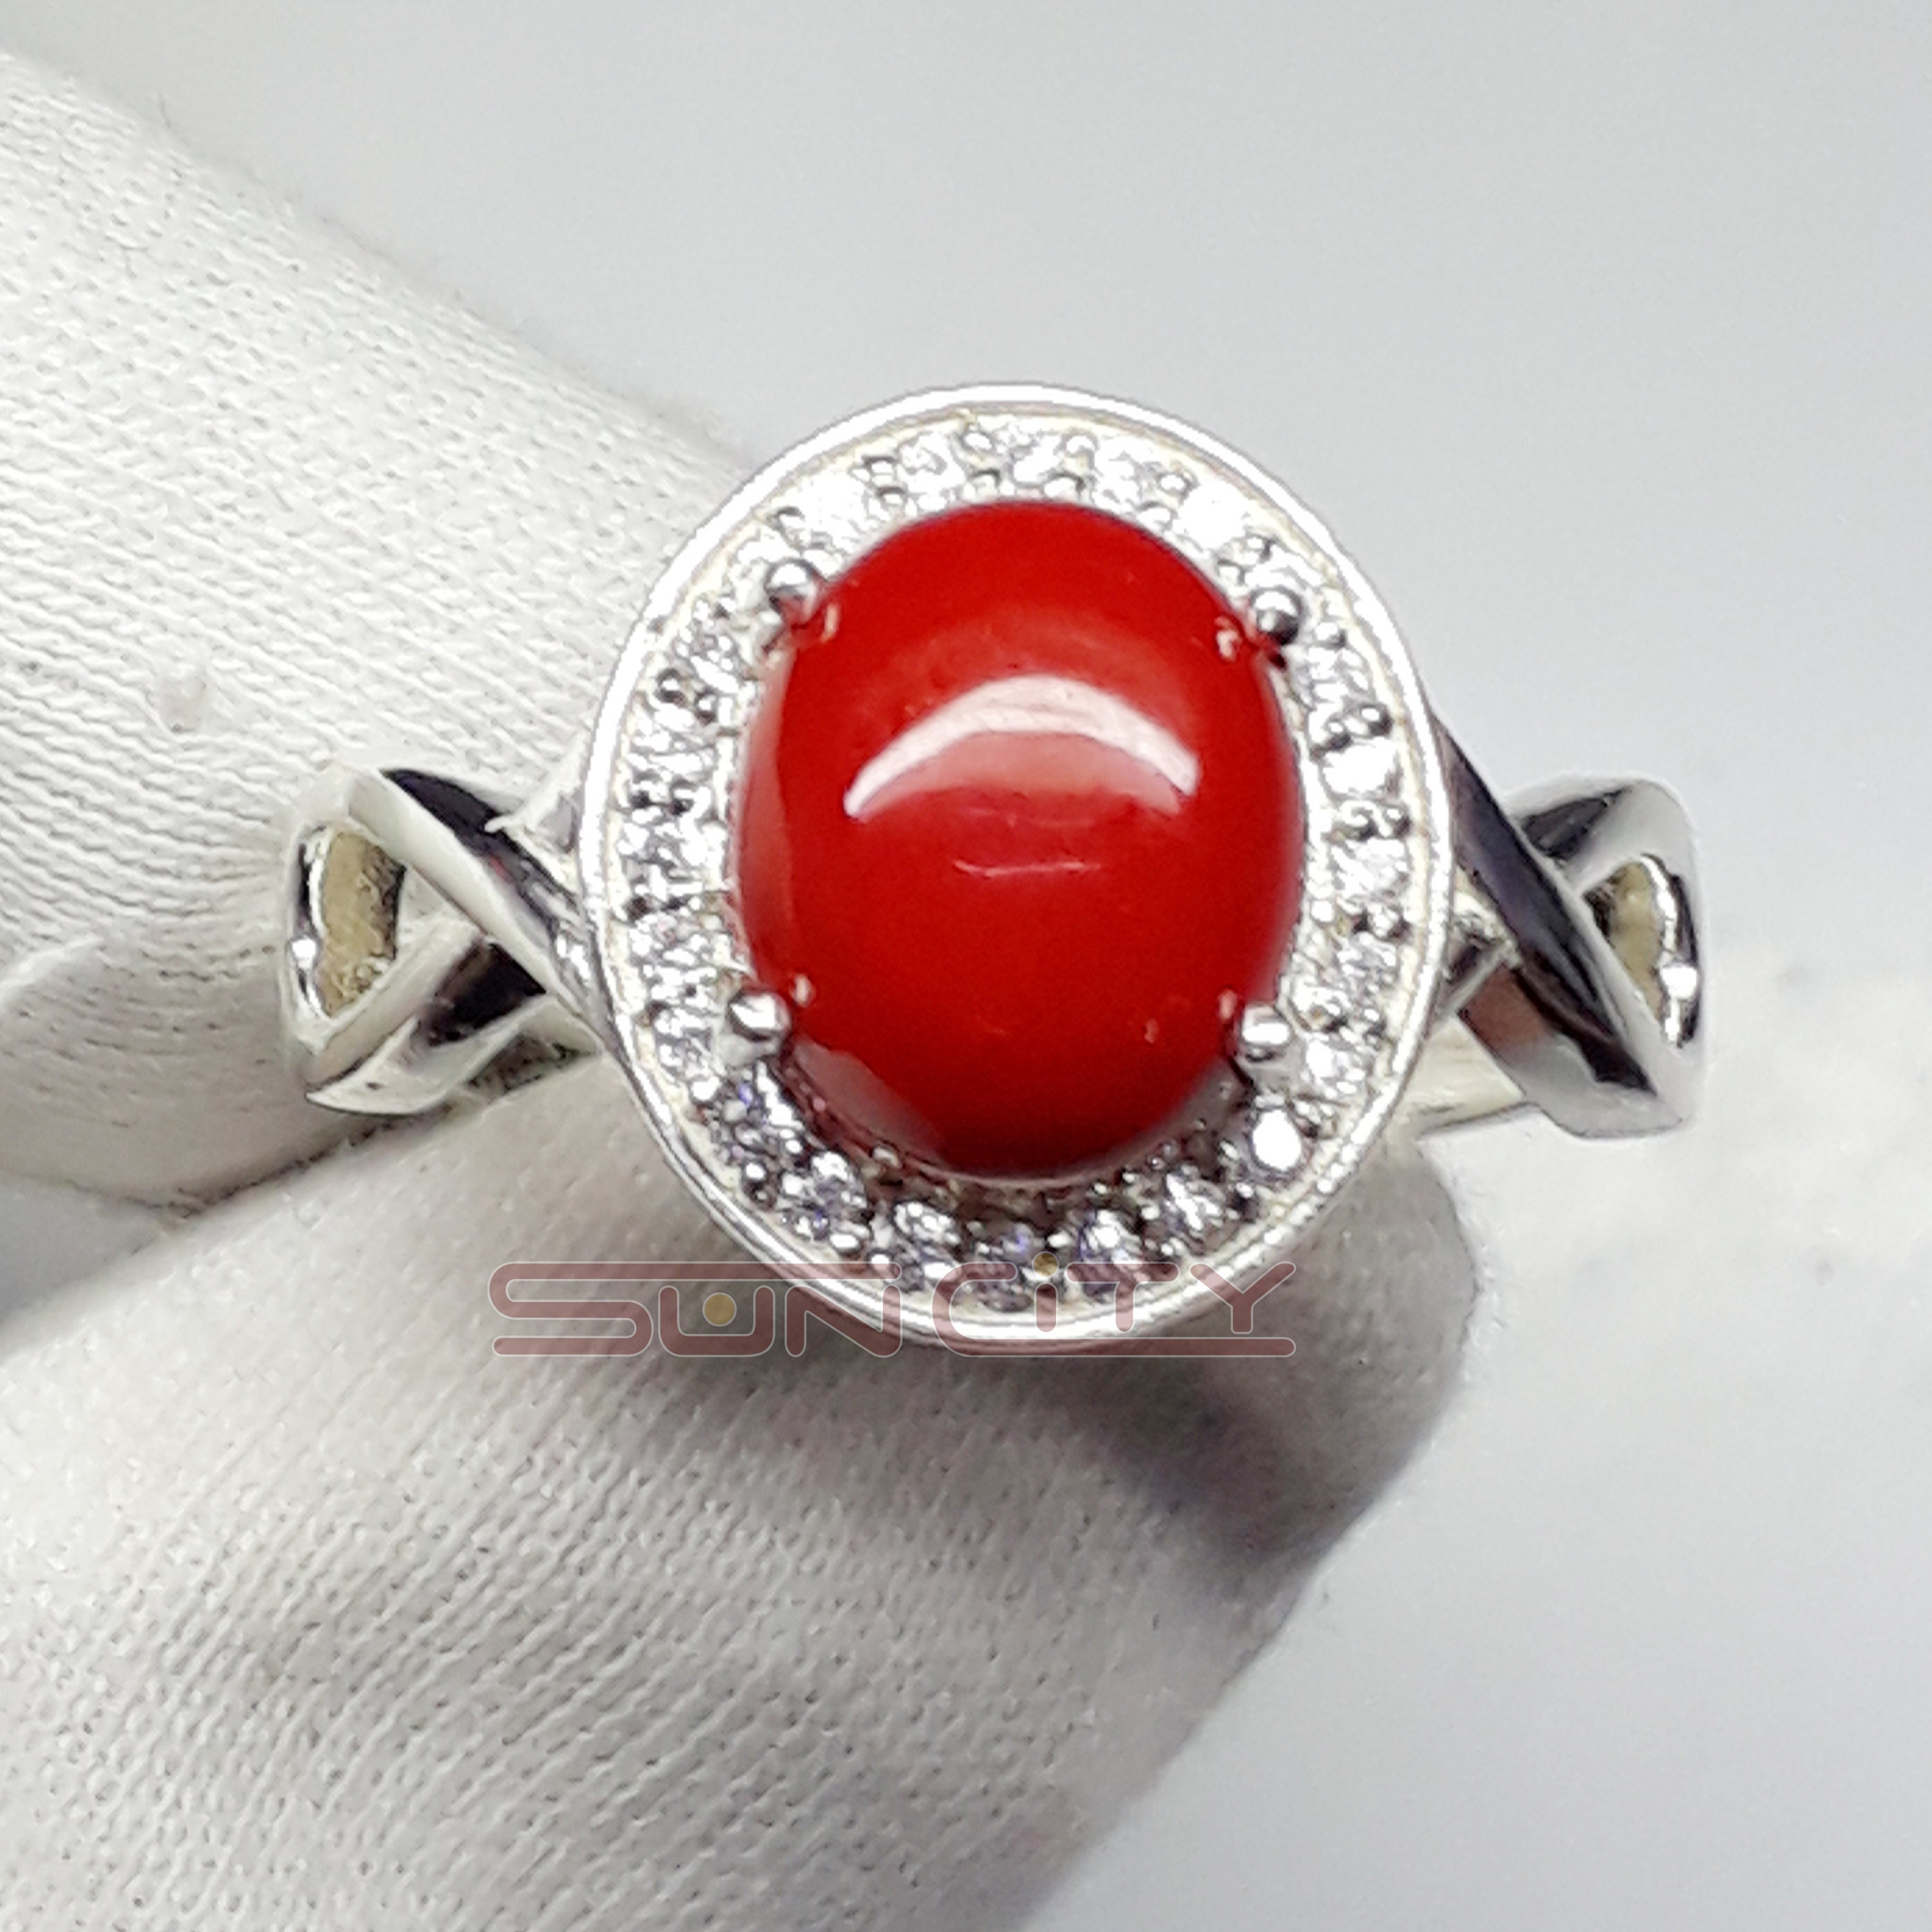 Amazon.com: Red Coral Stone Ring 925 Sterling Silver Statement Ring For  Women Handmade Rings Gemstone Christmas Promise Ring Size US 9 Gift For Her  : Handmade Products